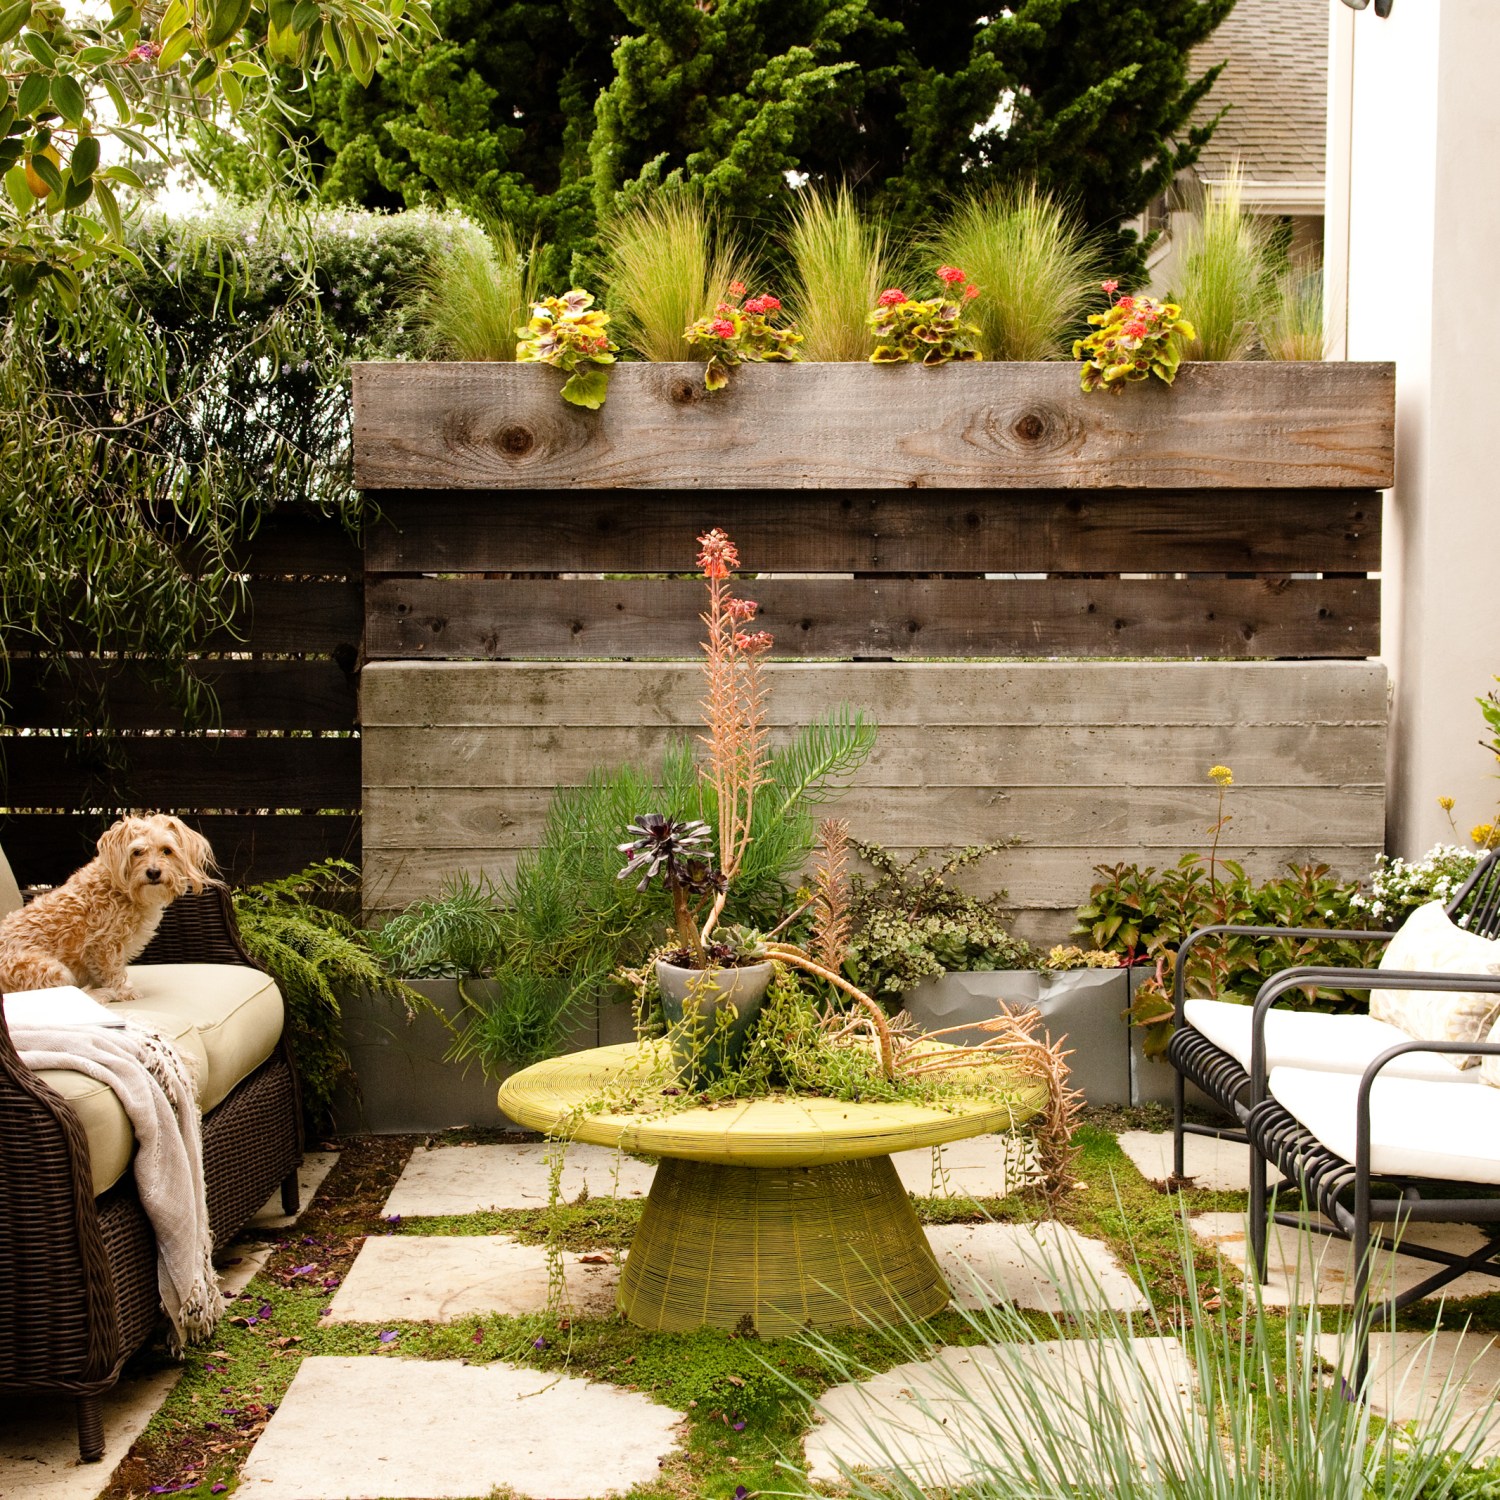 An outdoor space with patio furniture and a dog